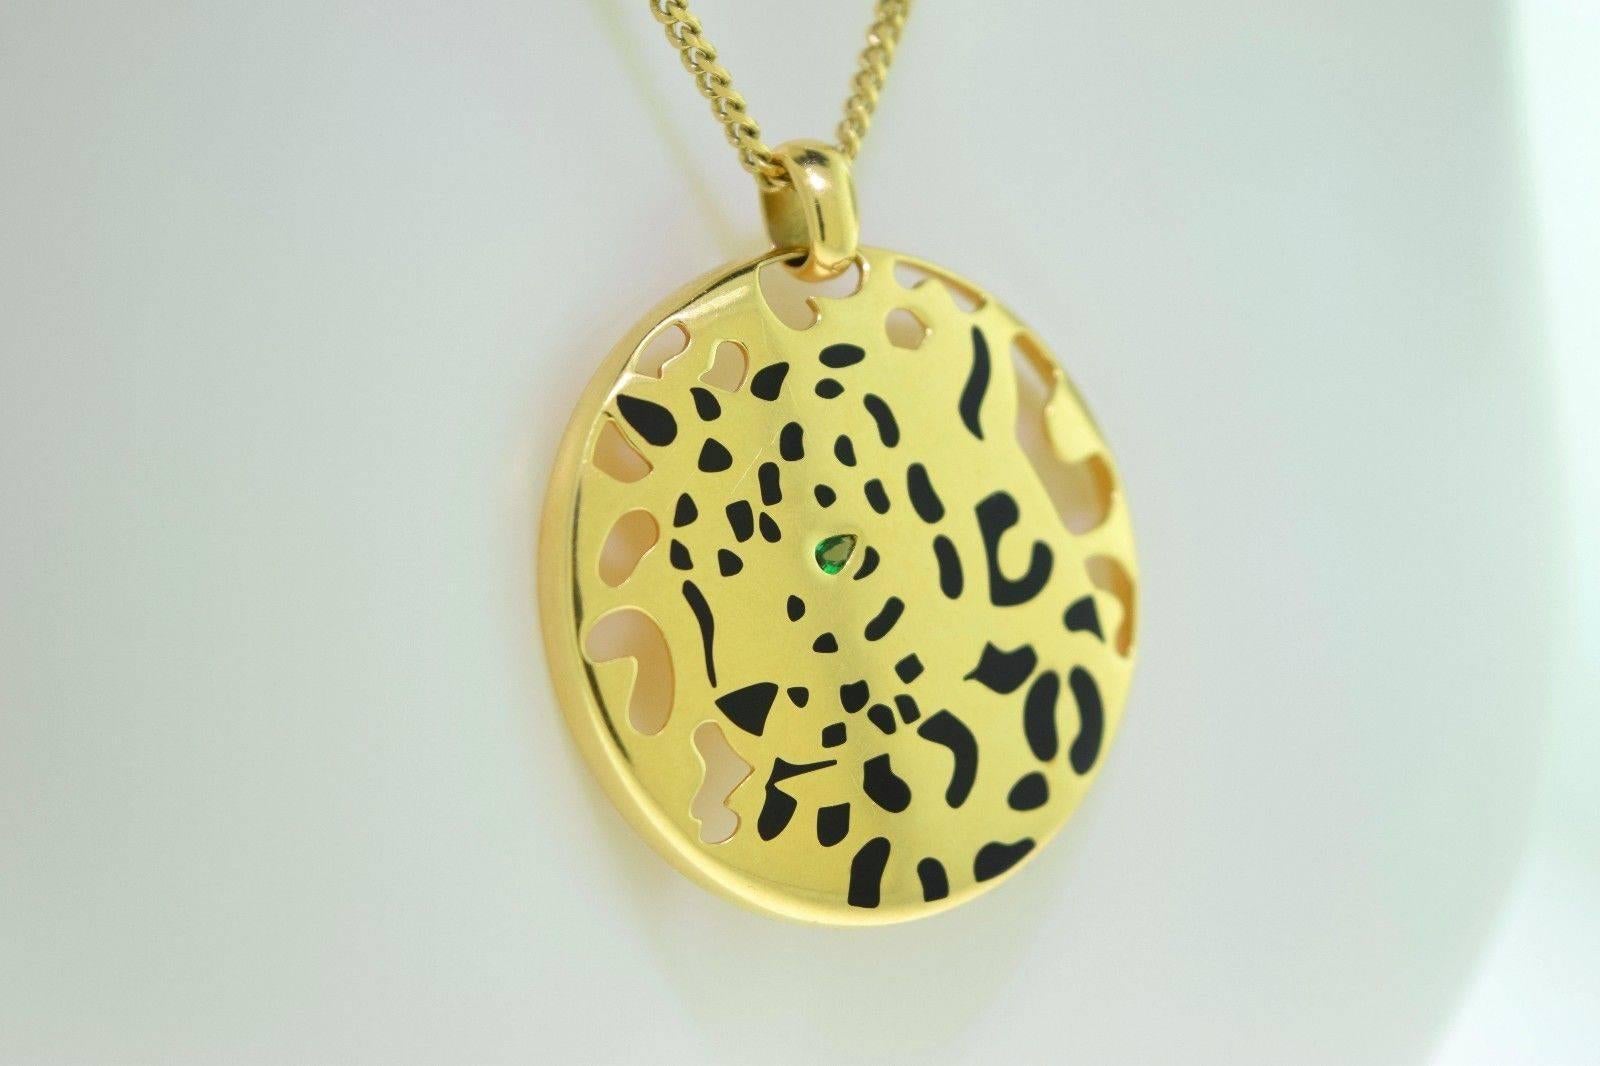 ABOUT THE ITEM:
Stunning 18k yellow gold round pendant of the signature Cartier Panther's head with black enamel spots and pear shaped emerald eye.

Item Specifications:
DESIGNER: Cartier
COLLECTION: Panthère de Cartier
METAL: Yellow Gold
METAL